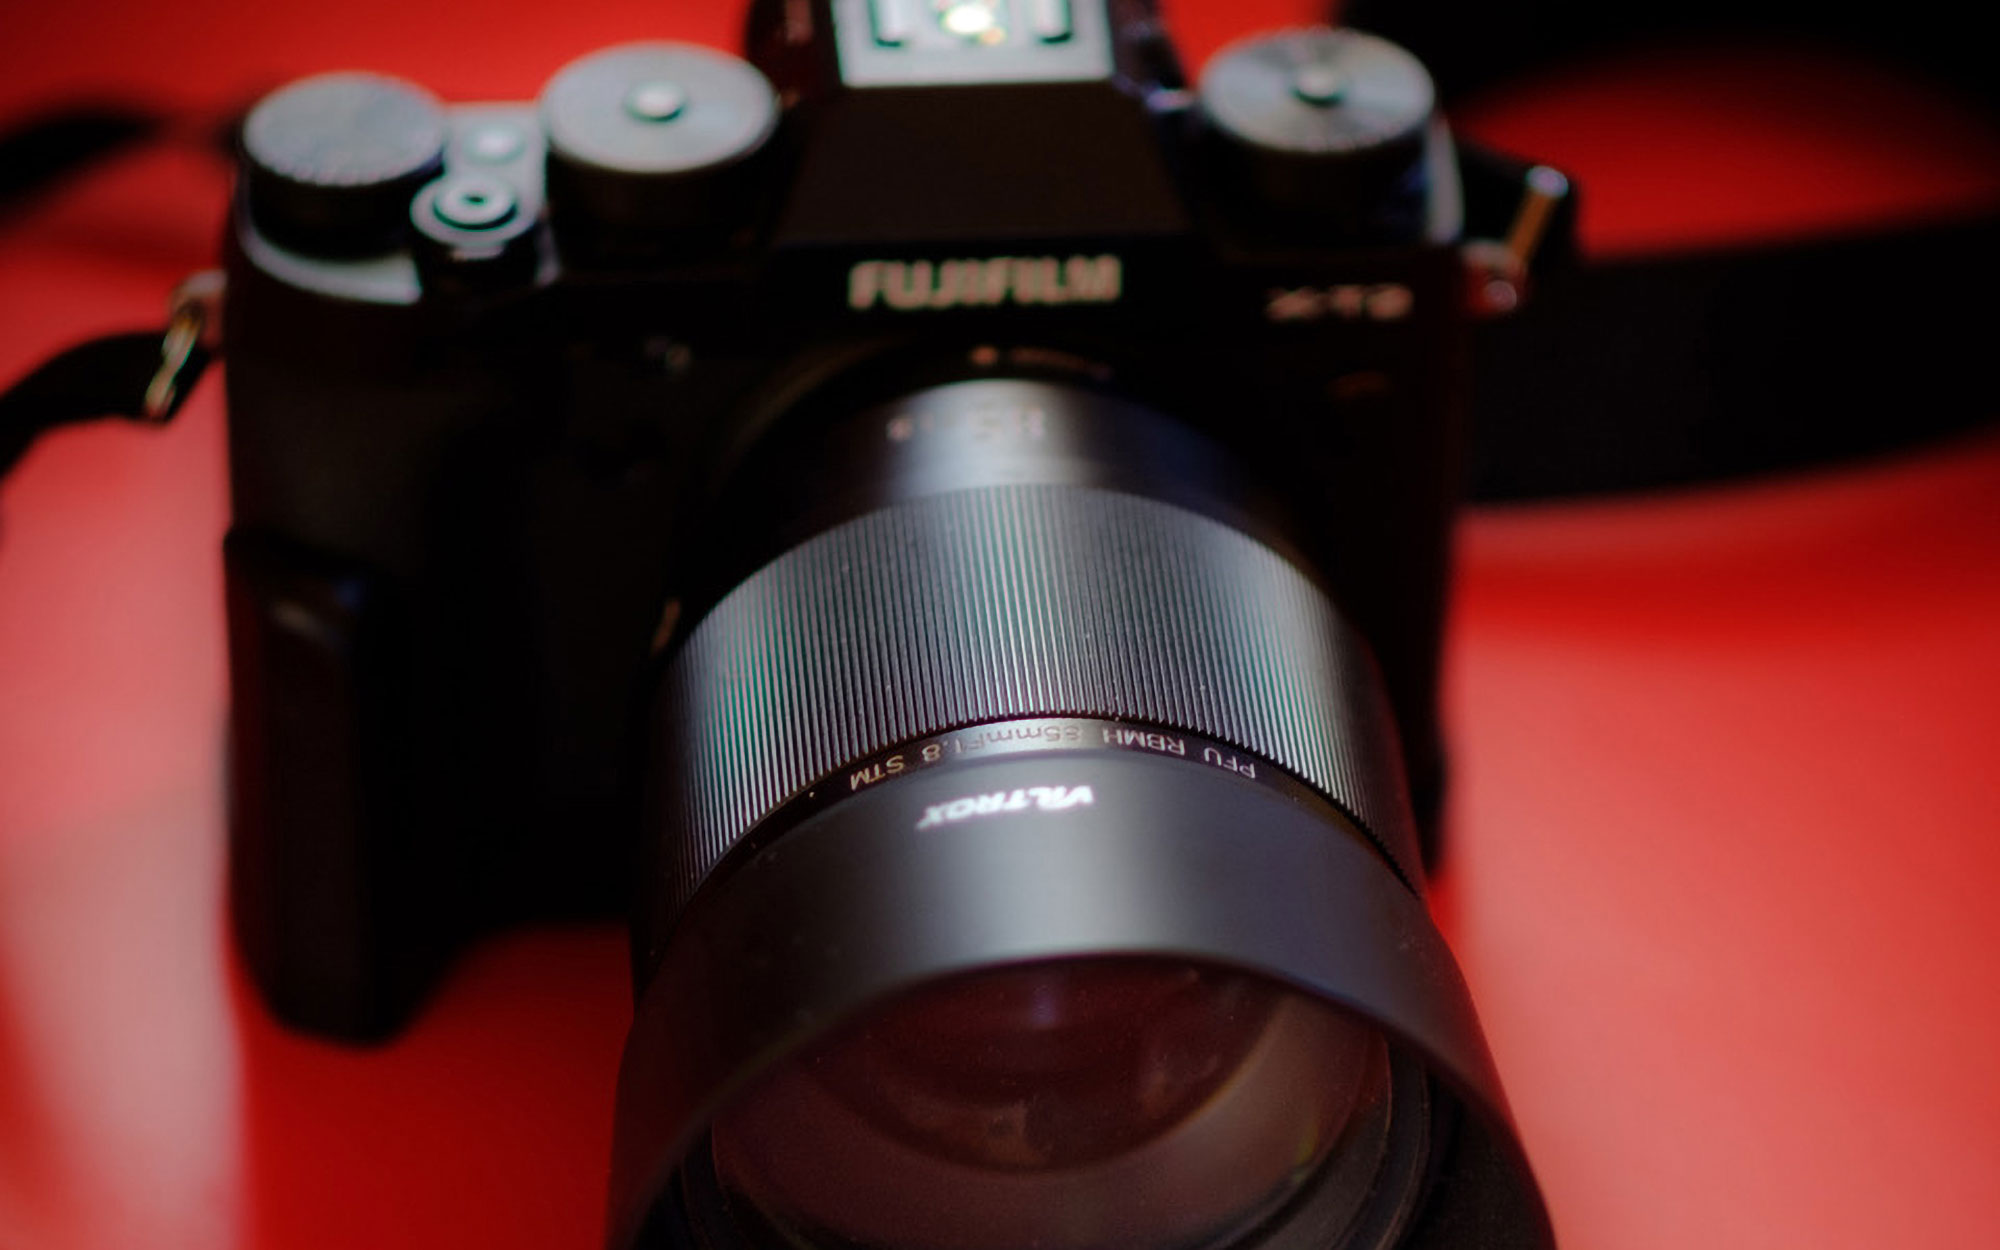 Zuinig leiderschap was A non-review review of the Viltrox 85mm 1.8 lens (on Fuji X-T2) - Fuji X  Passion